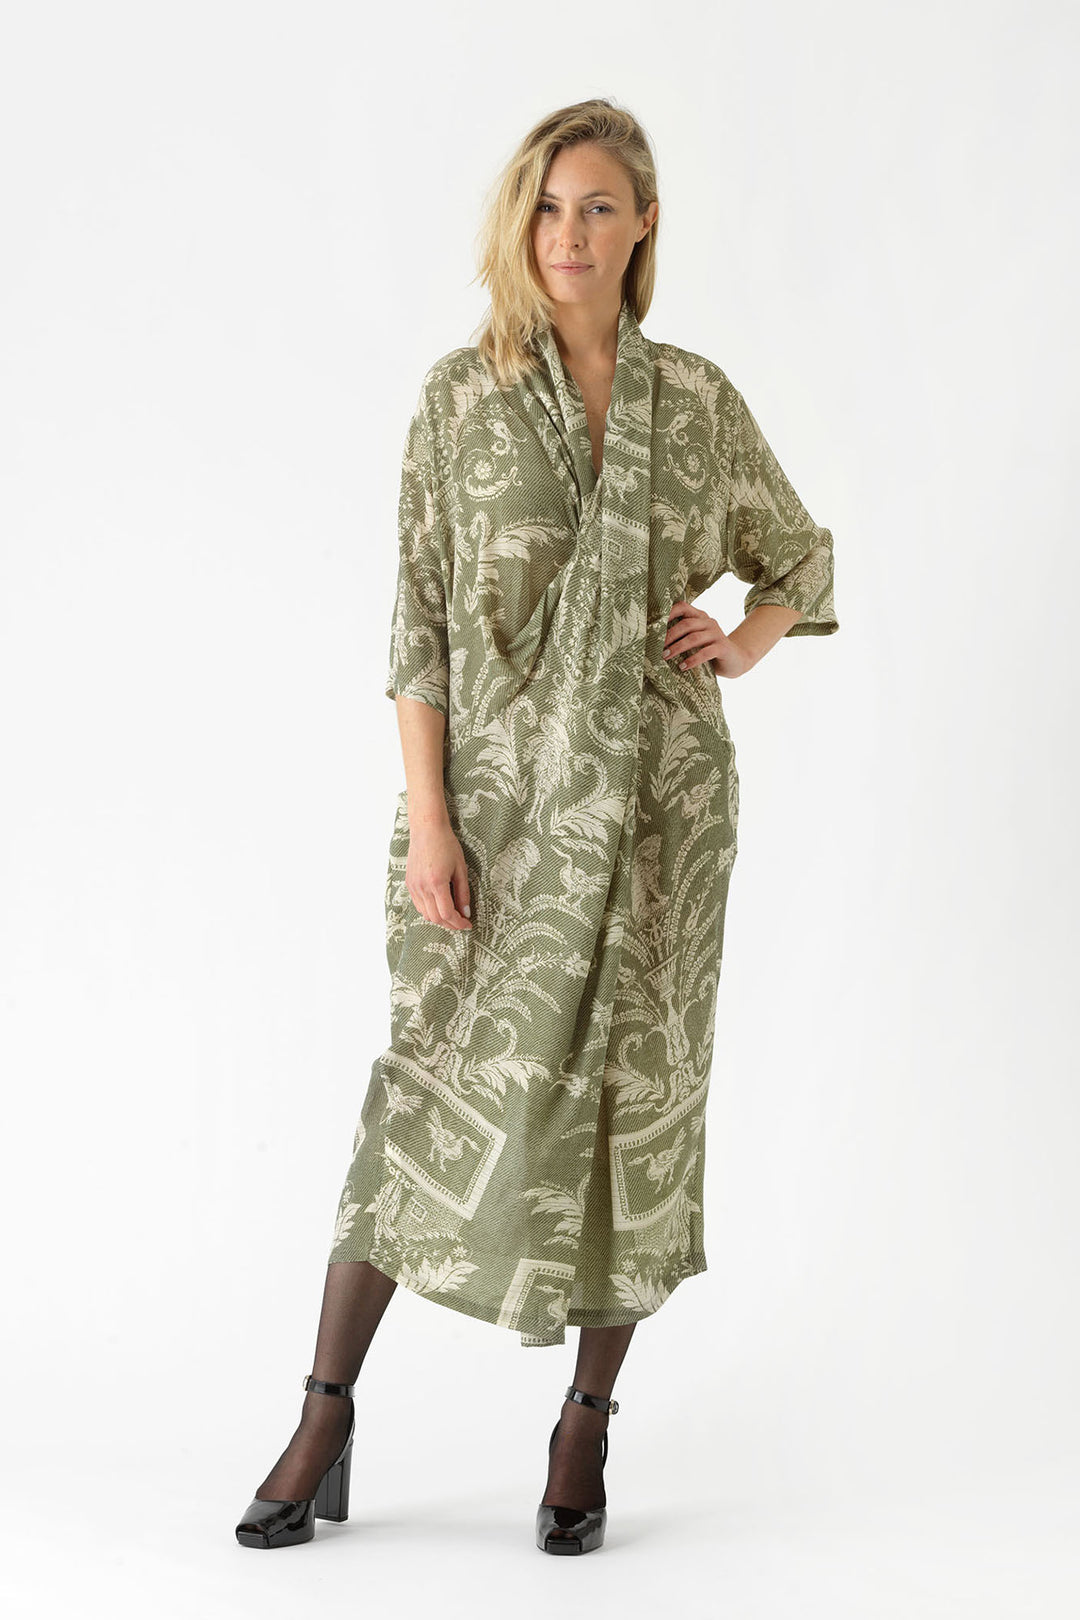 ladies cowl neck Party Pockets rachel dress in sage green vintage damask print by One Hundred Stars